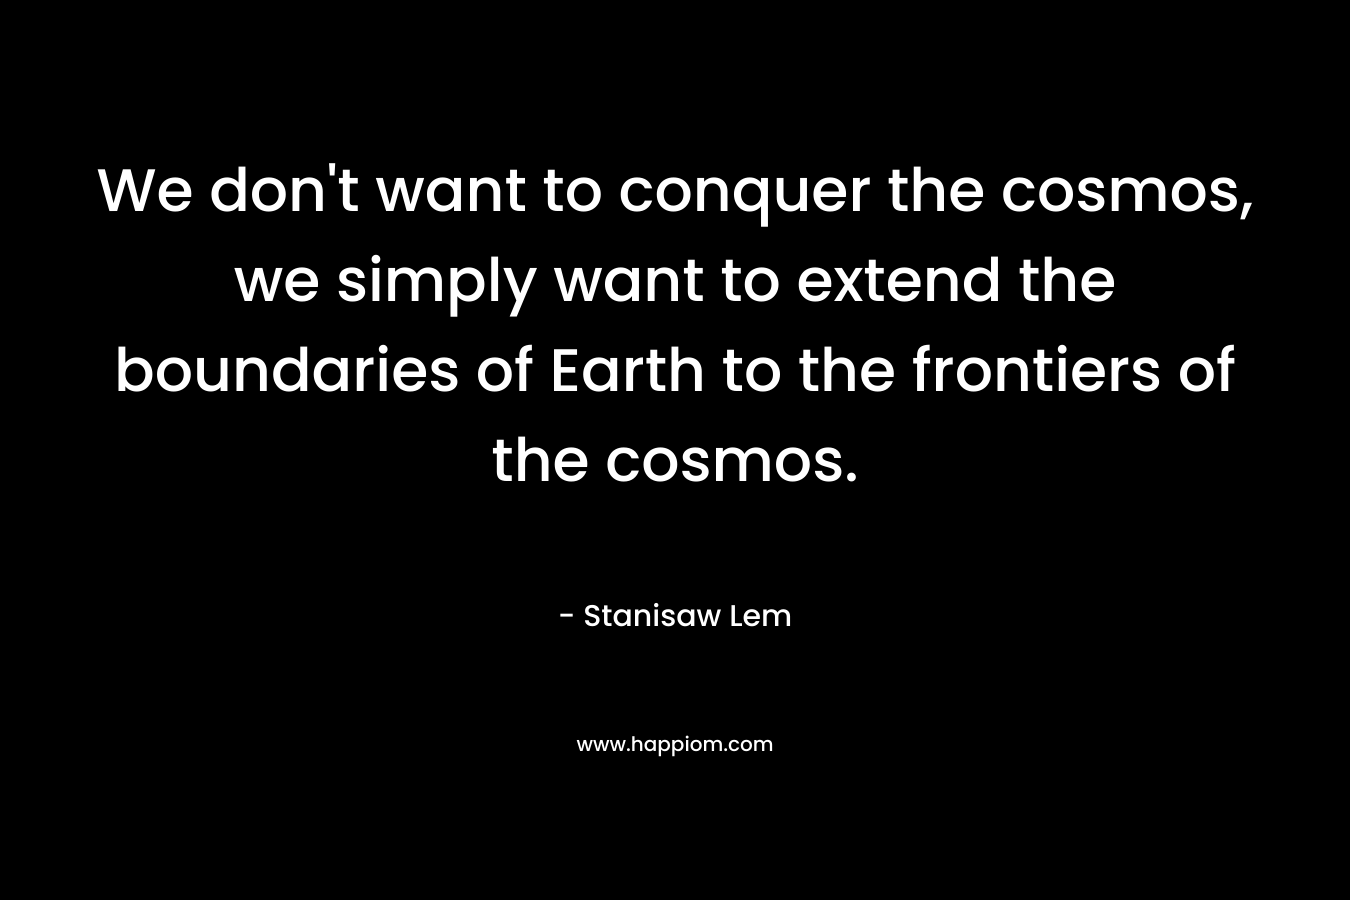 We don't want to conquer the cosmos, we simply want to extend the boundaries of Earth to the frontiers of the cosmos.